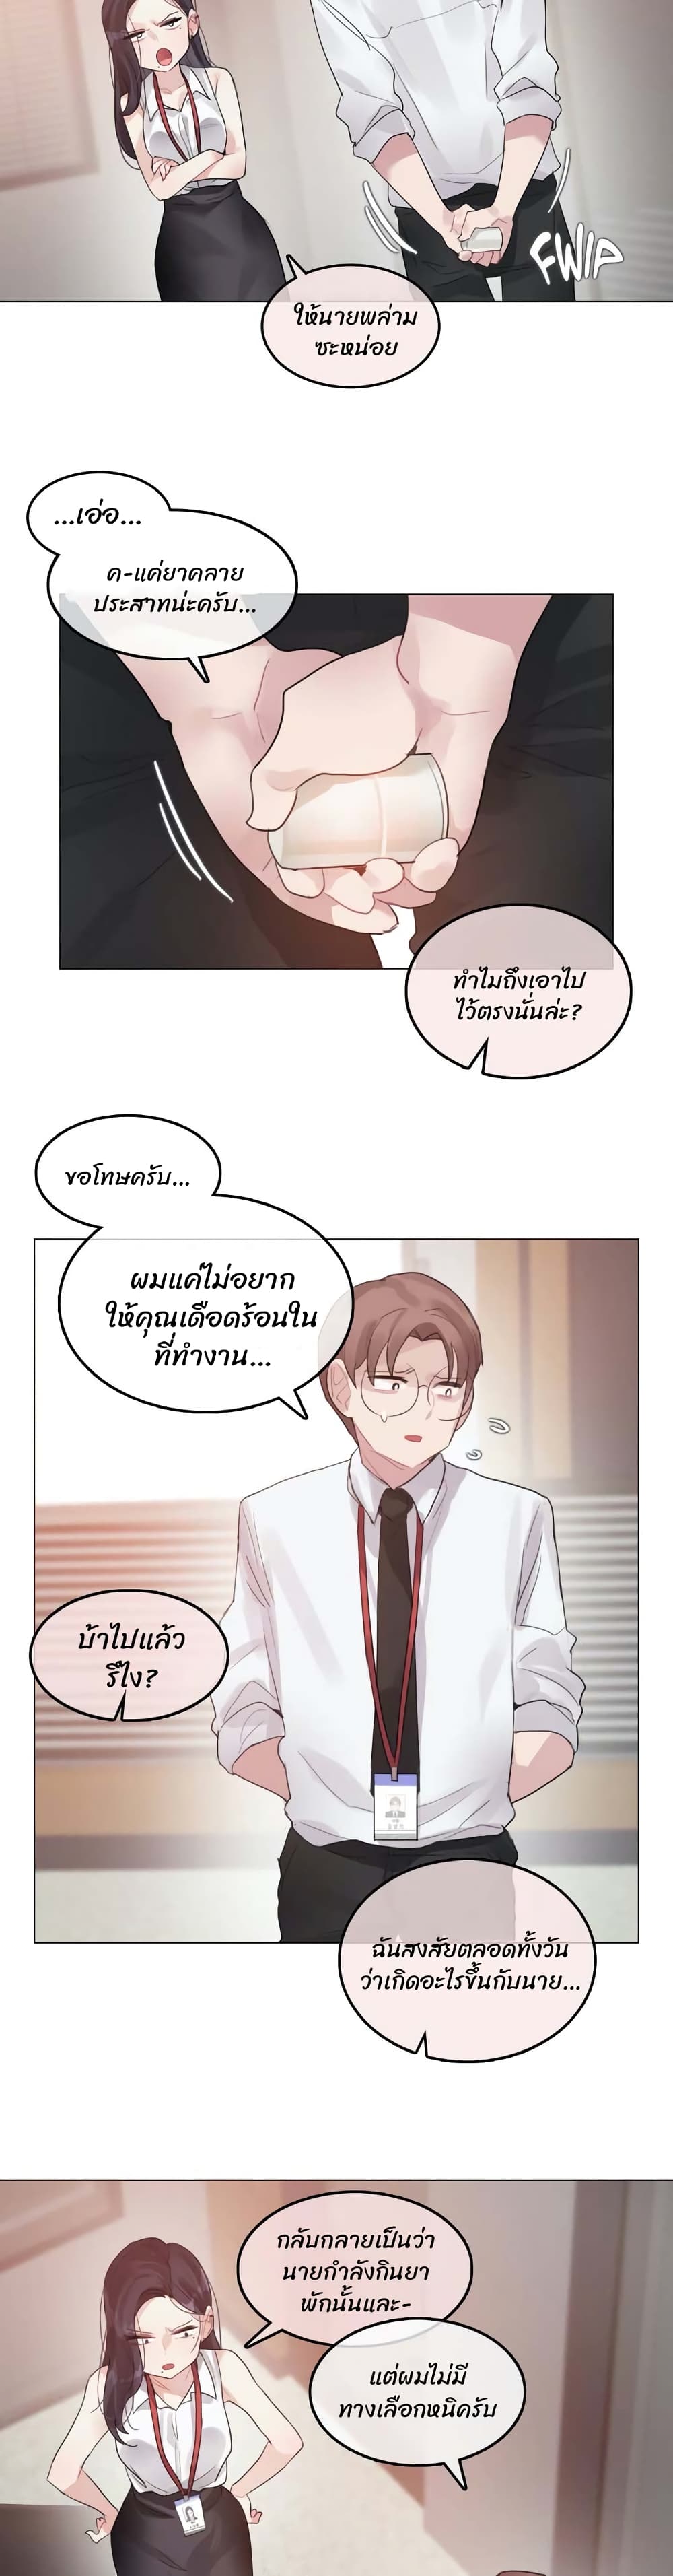 A Pervert's Daily Life 96 (15)